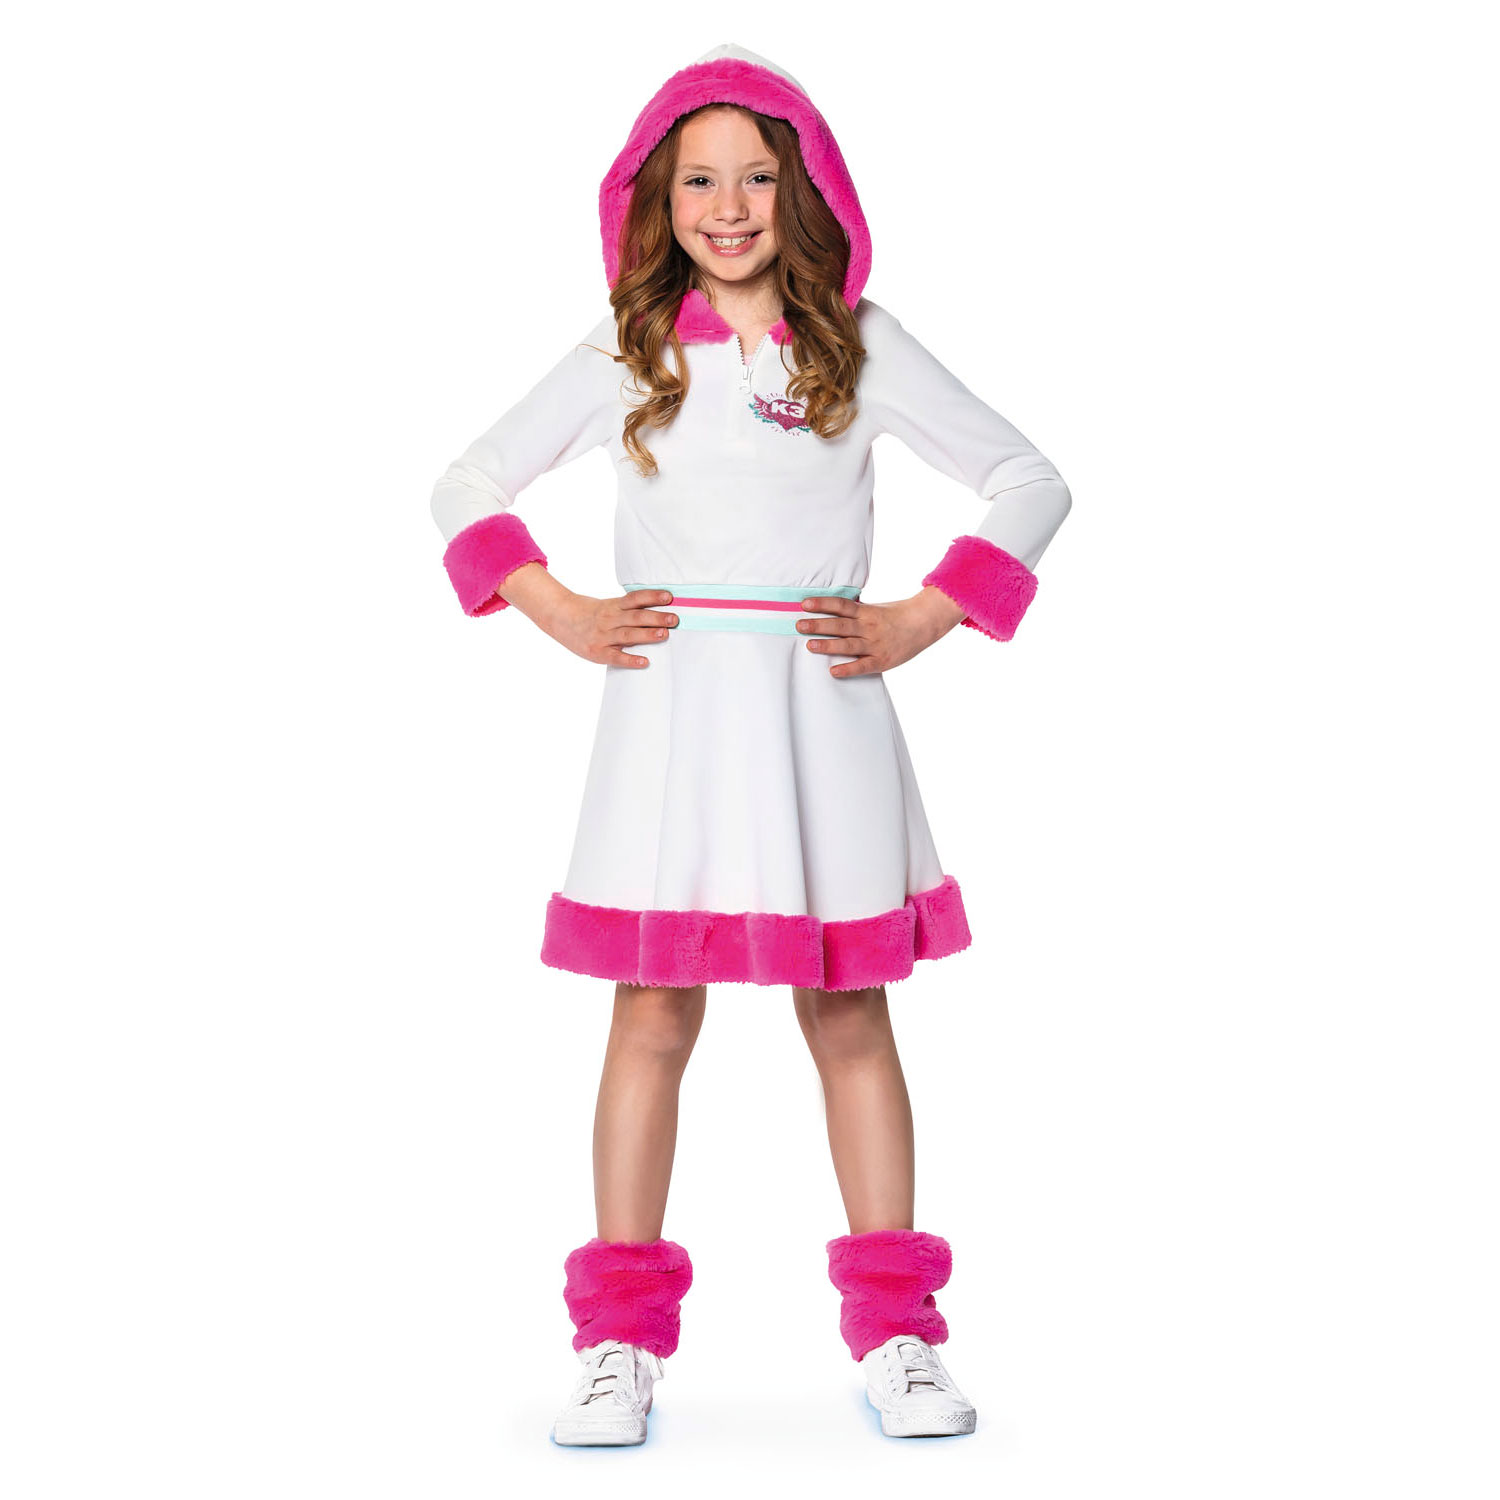 inleveren Idioot gastheer K3 Dress Up Dreams, 9-11 years old | Thimble Toys